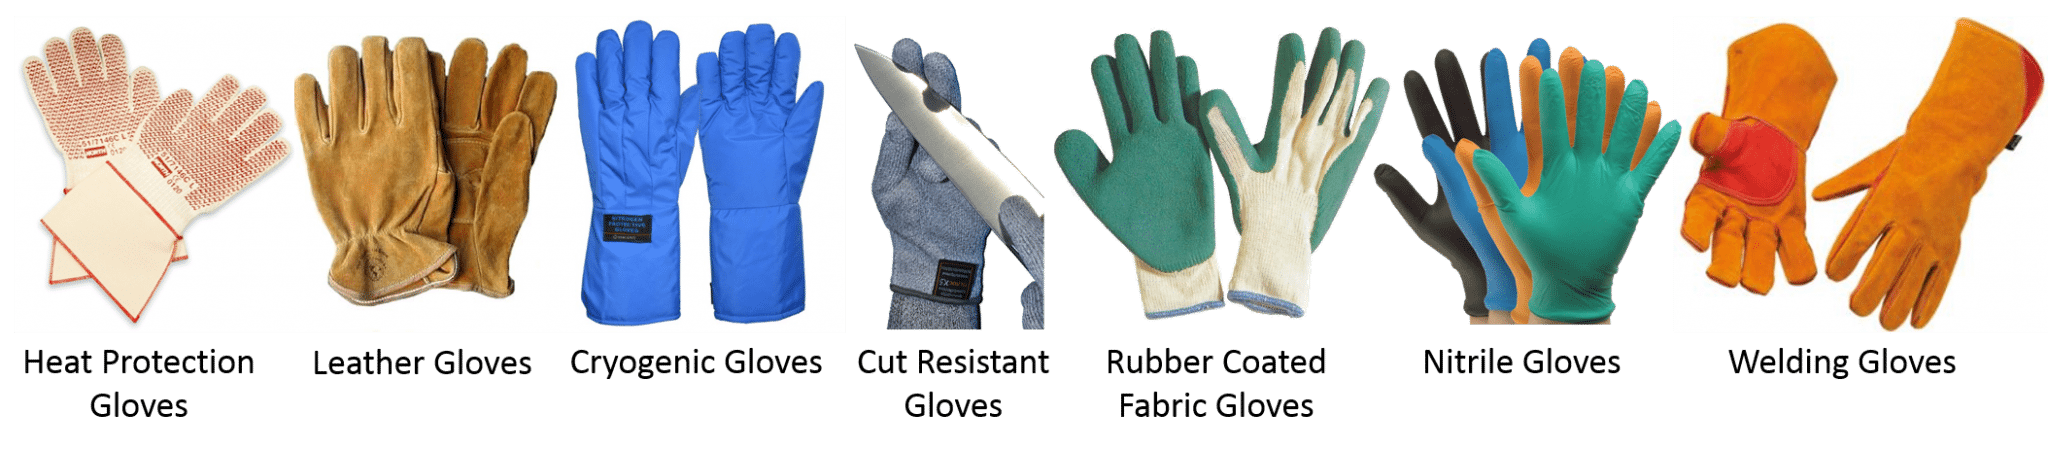 image of different types of gloves